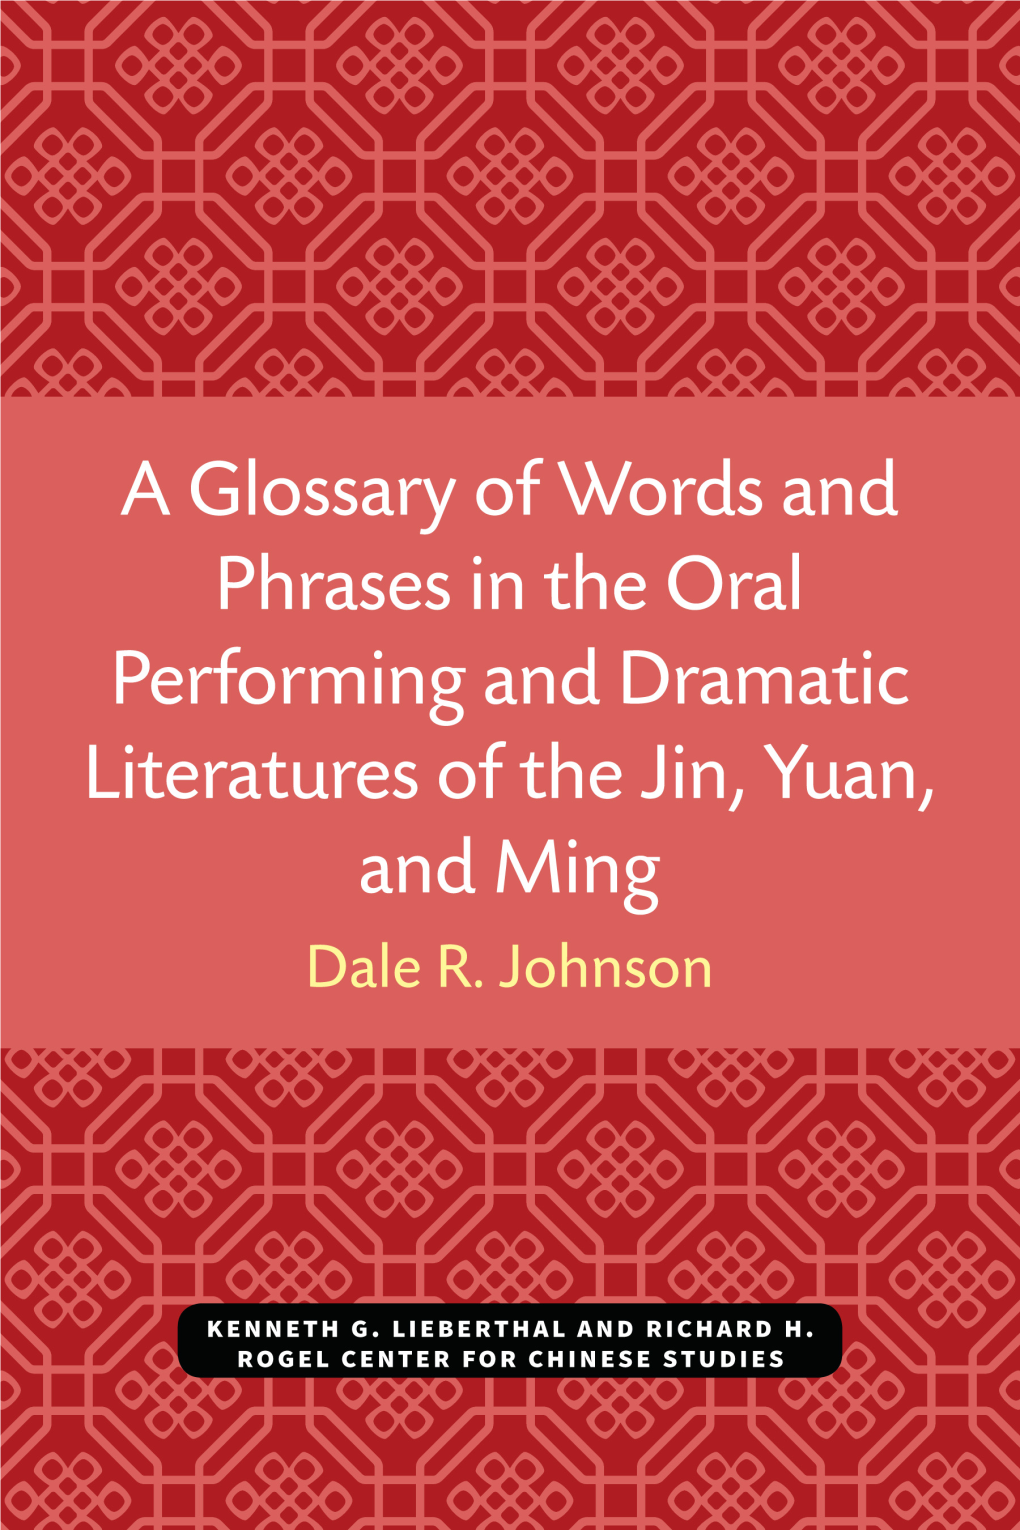 A Glossary of Words and Phrases in the Oral Performing and Dramatic